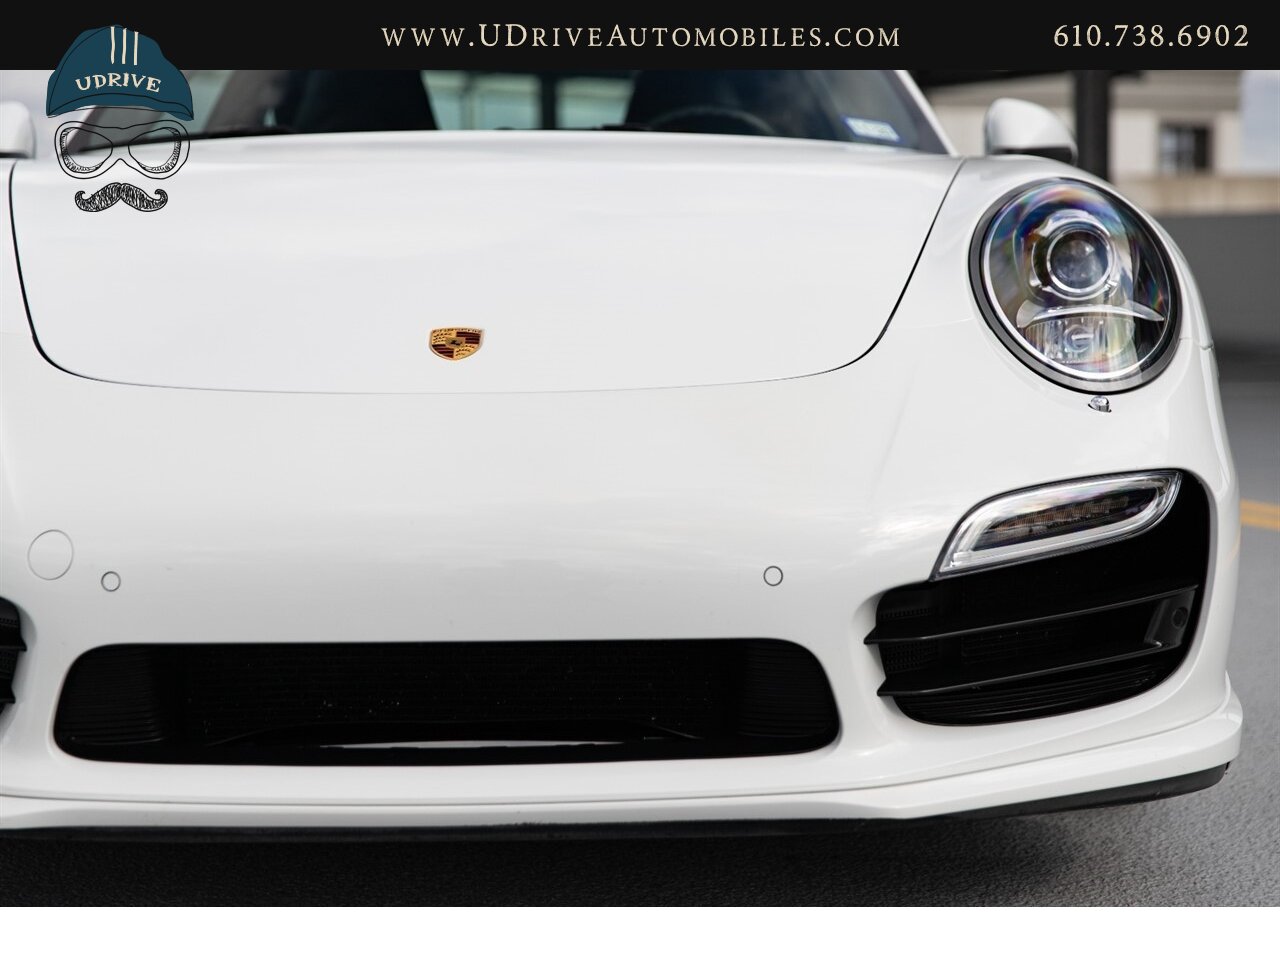 2014 Porsche 911 Turbo 12k Miles White over Black Chrono Rear Wiper  Sport Seats 20in Turbo Whls Sunroof Red Belts - Photo 10 - West Chester, PA 19382